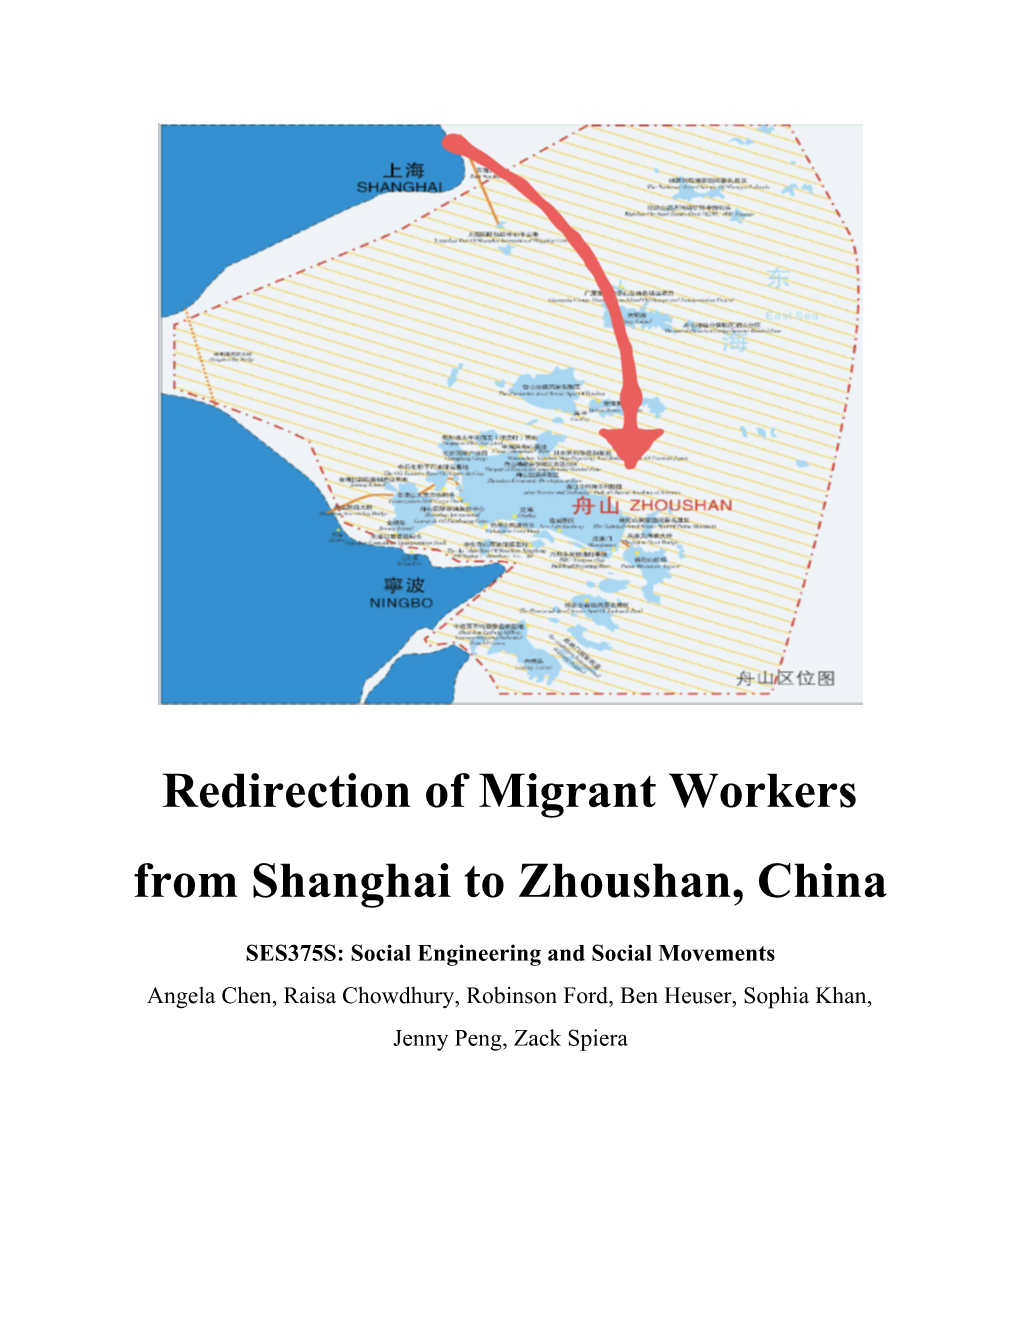 Of Migrant Workers from Shanghai to Zhoushan, China